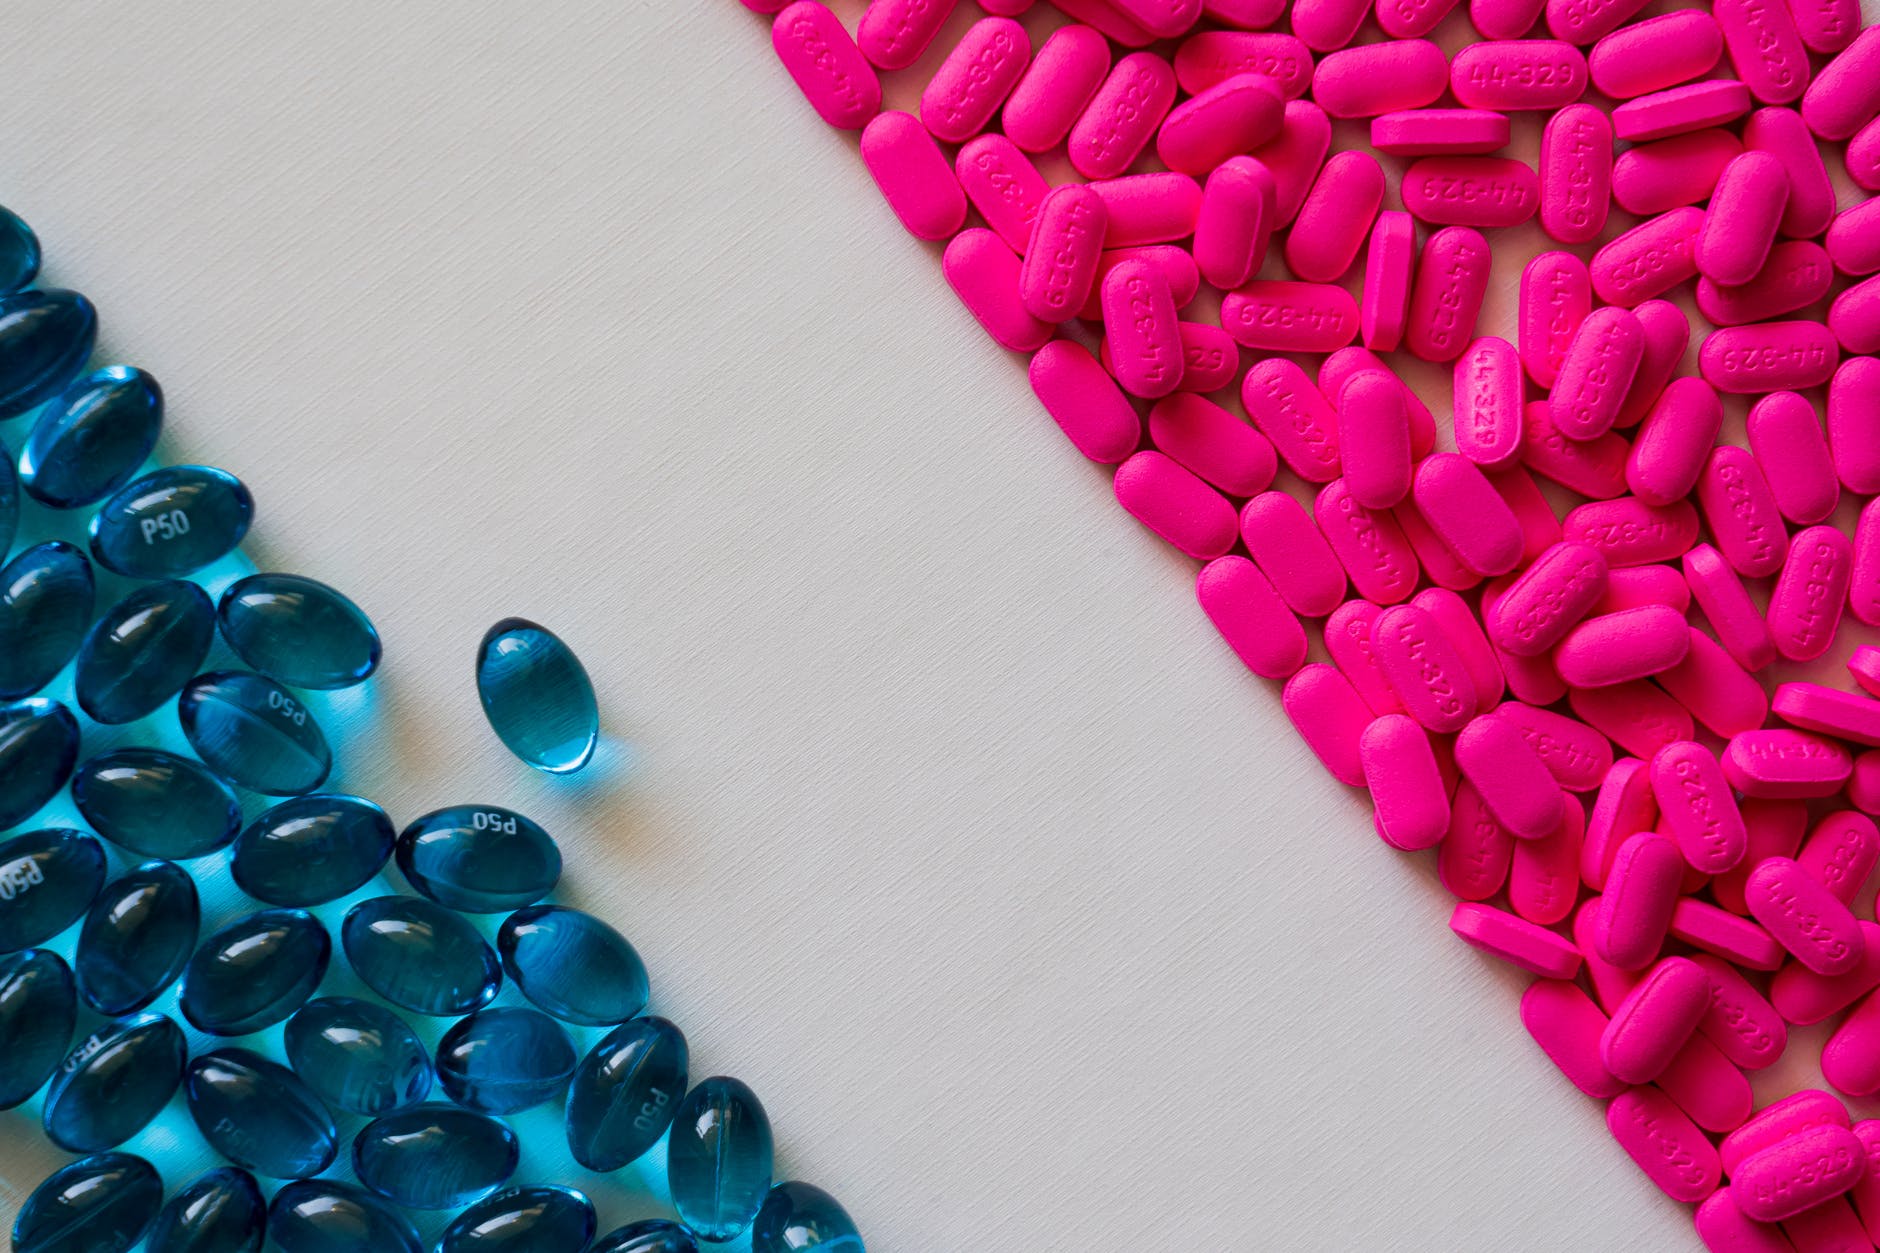 pink tablets and blue capsules in close up view